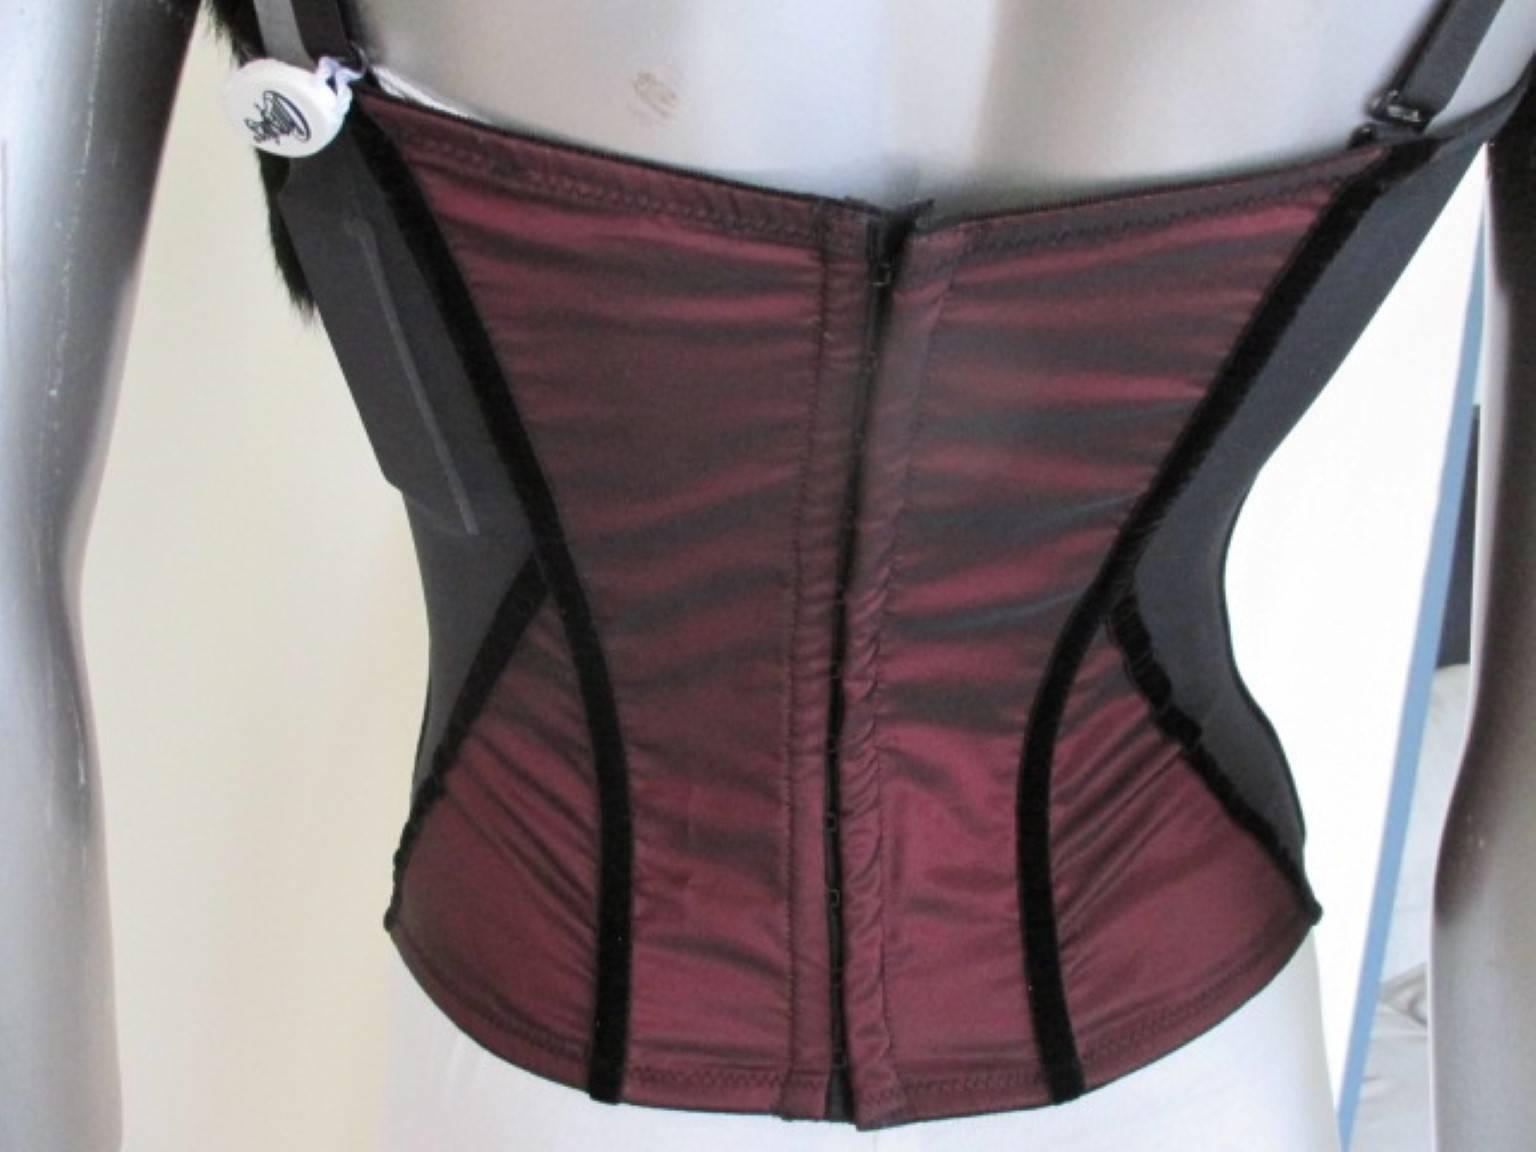 This bustier is new and never worn it has still the tags from the exclusive Italian designer lingerie brand Christies.
The color is black / bordeaux with black fur and rhinestones, the fur is
detachable and the body has velvet details.

Size